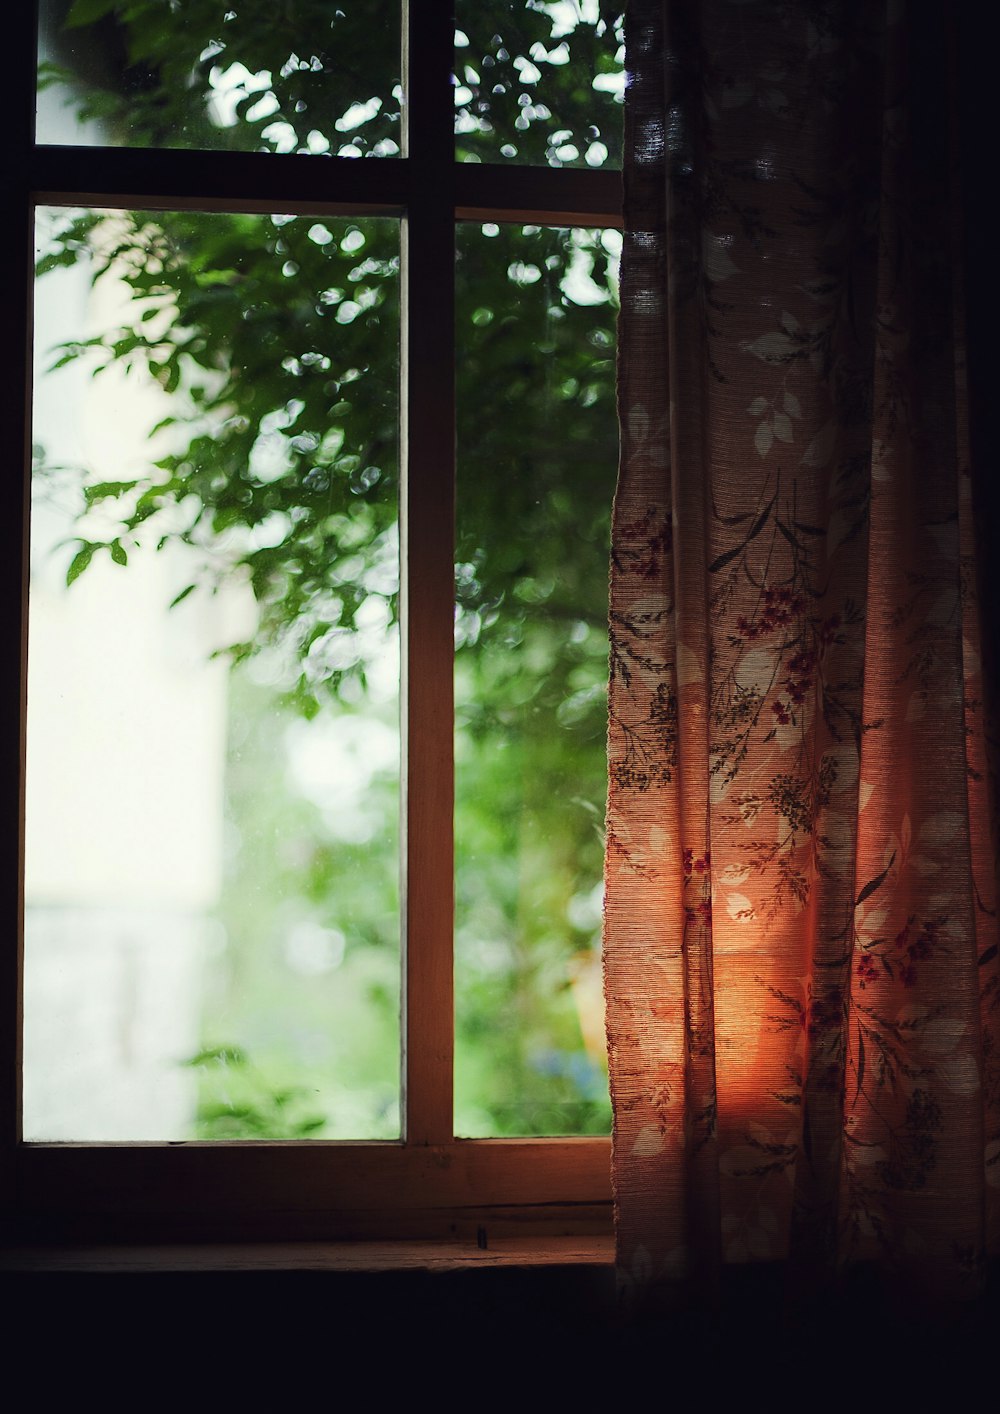 brown and black floral curtains near green leafed trees photo – Free Saint  petersburg Image on Unsplash